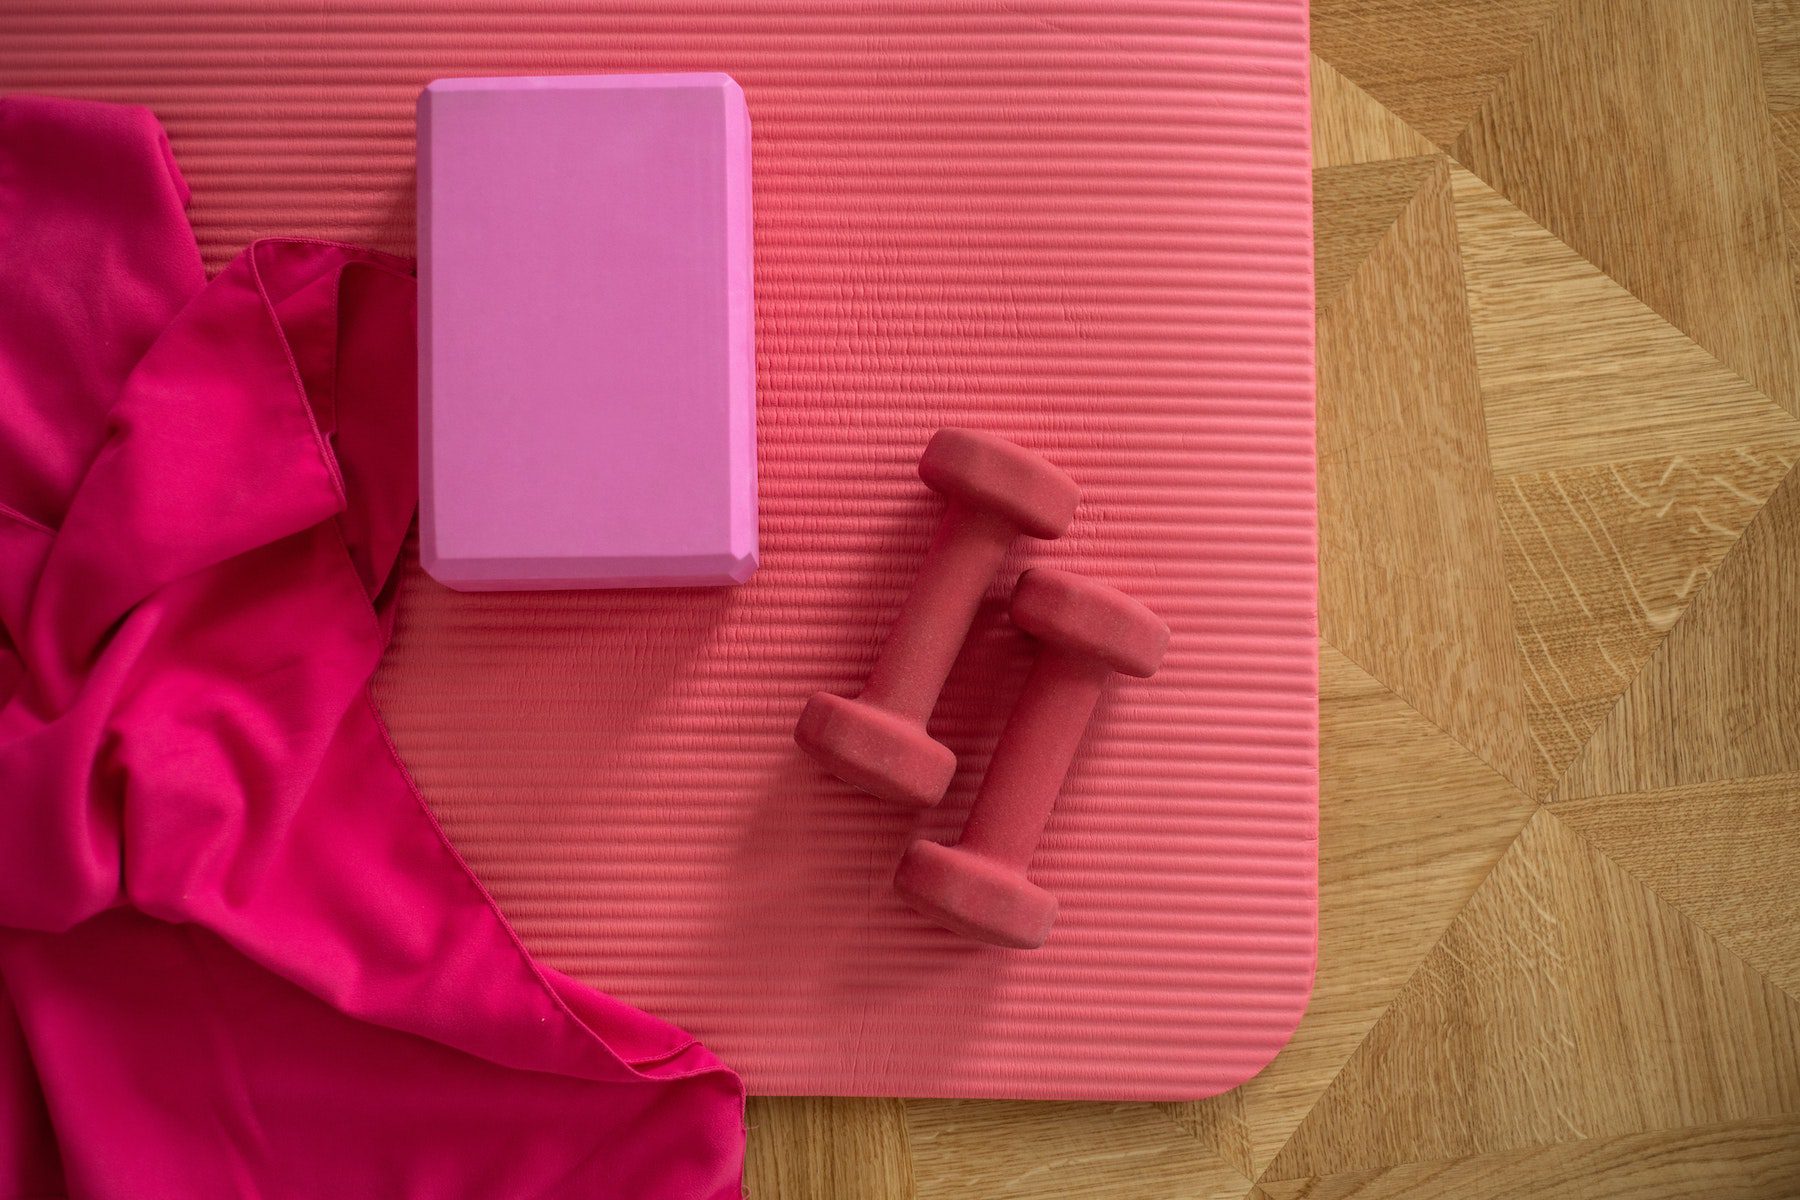 Pink yoga block with a pink towel and red lightweight dumbbells atop a pink yoga mat